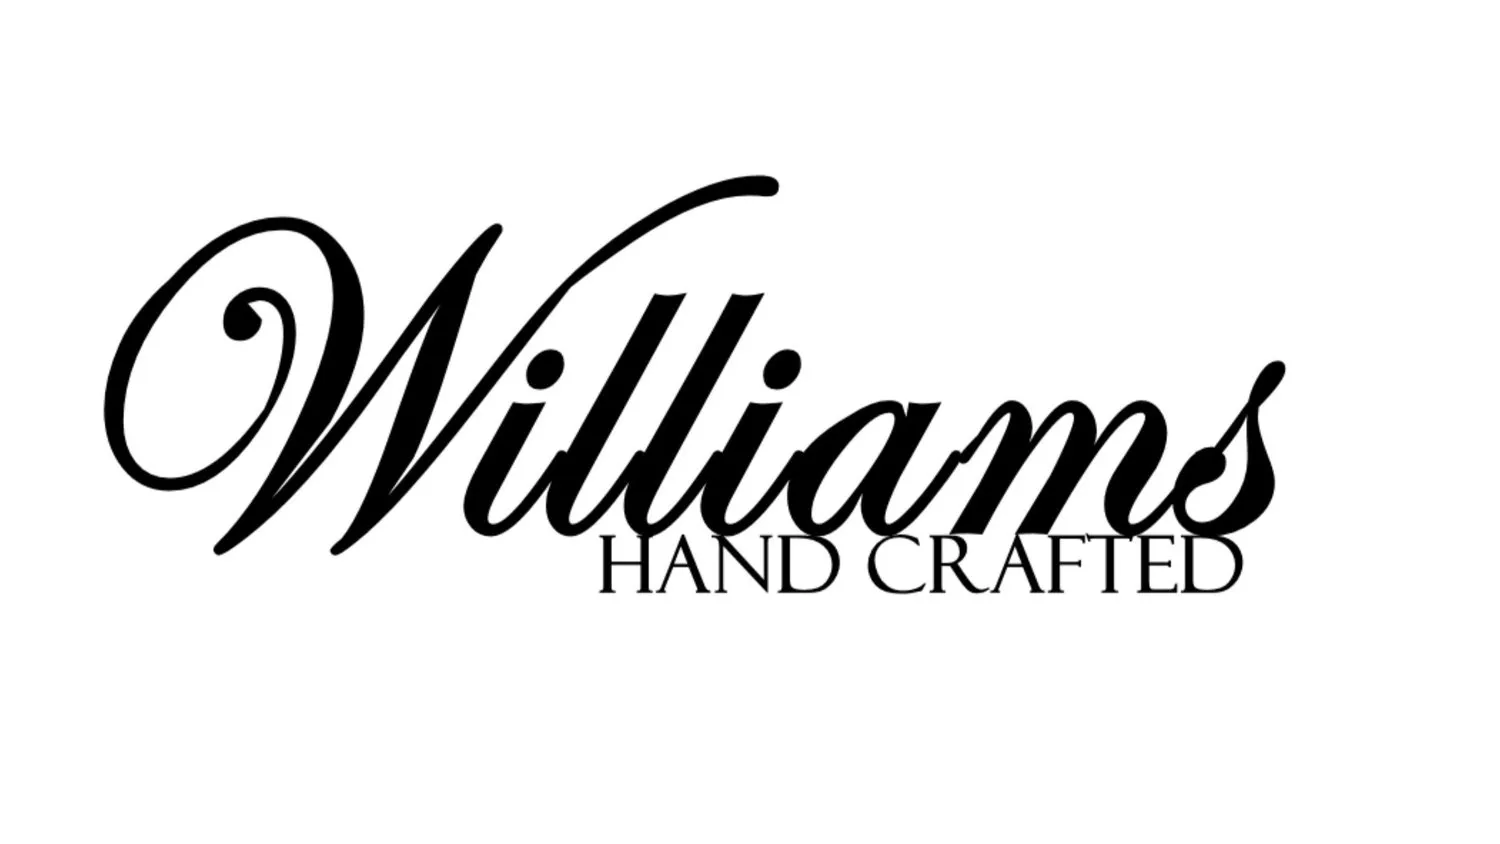 Williams Handcrafted